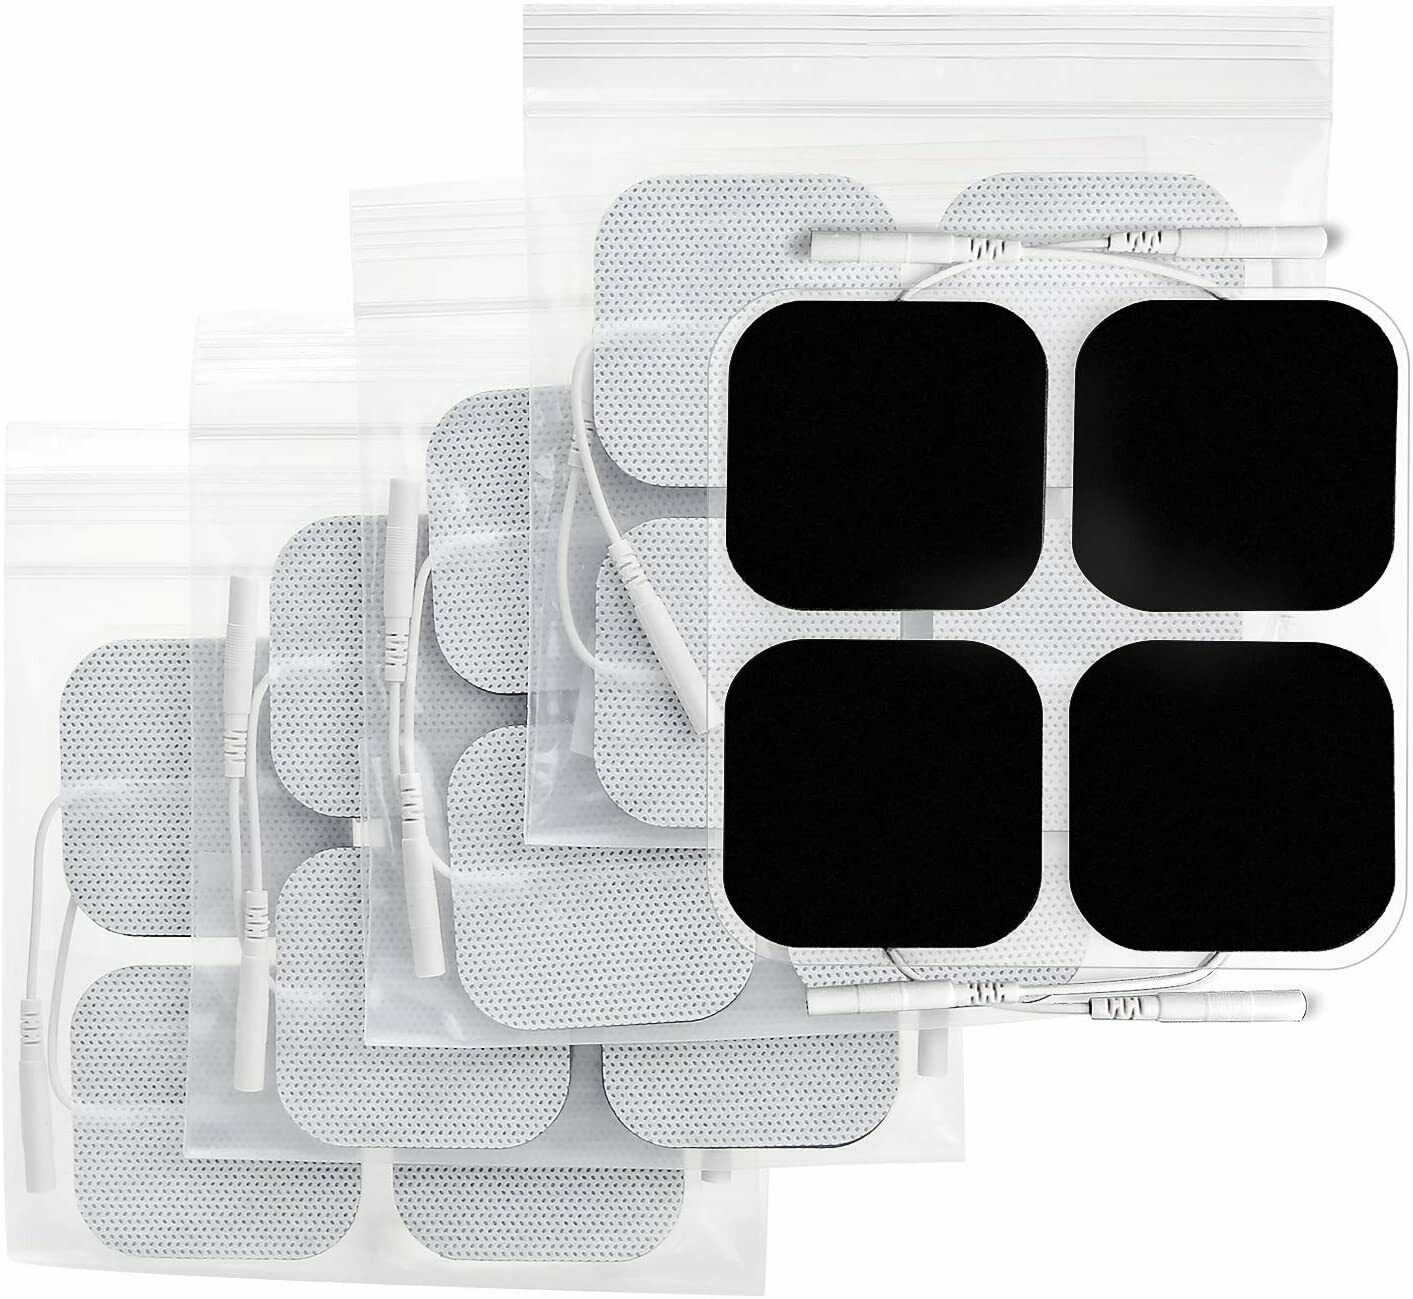 40 Replacement Tens Electrode Pads Ems For Units 7000 3000 2x2 Muscle Stimulator